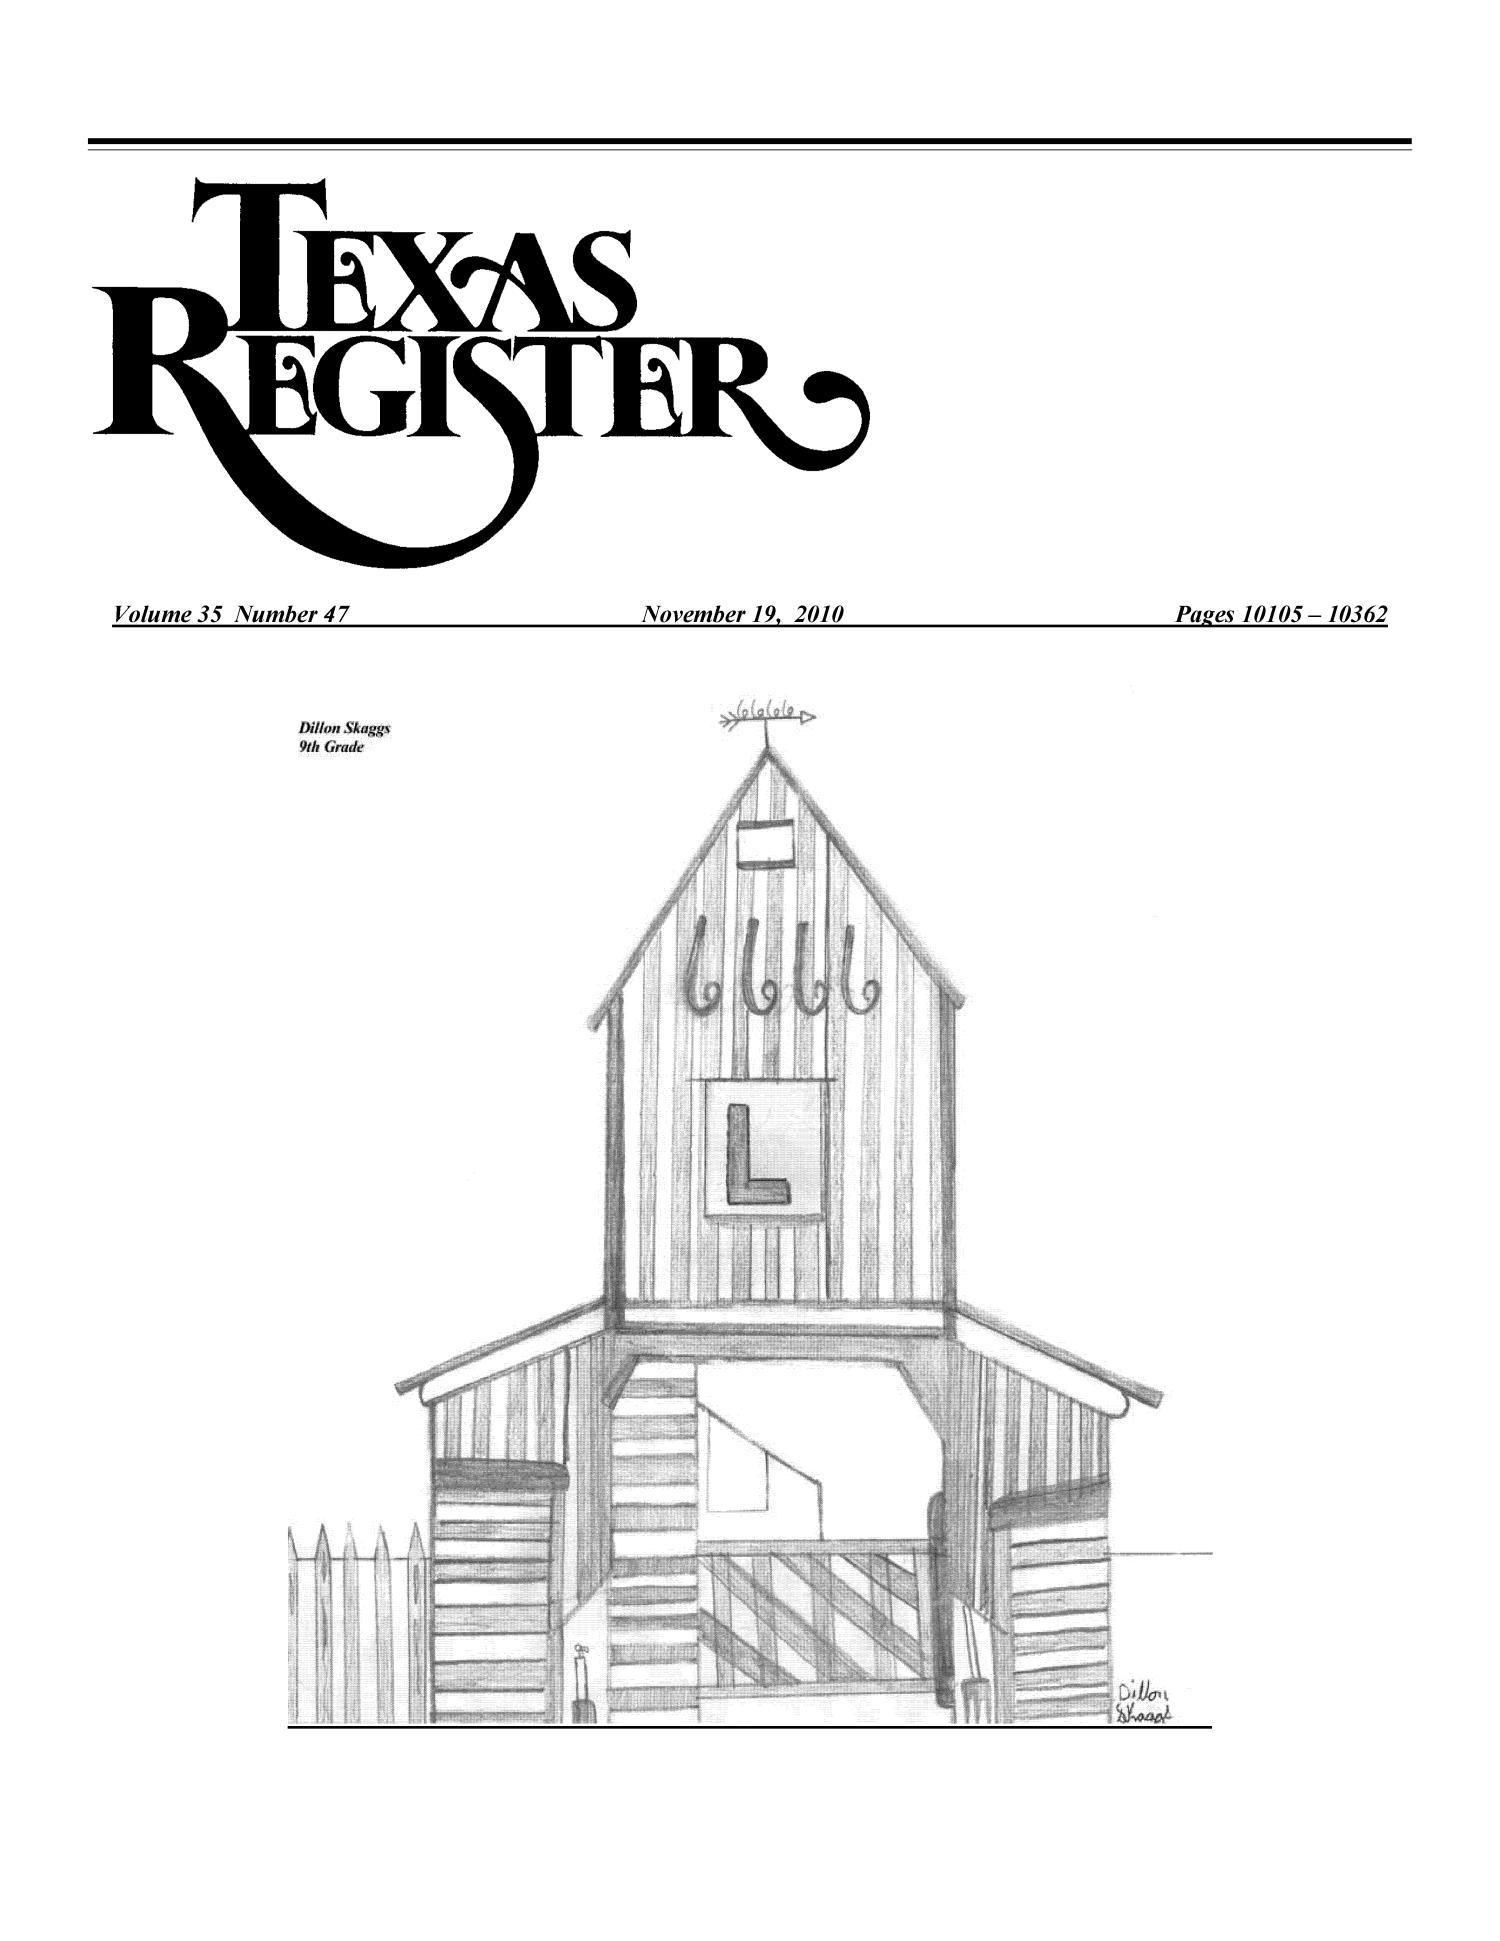 Texas Register, Volume 35, Number 47, Pages 10105-10362, November 19, 2010
                                                
                                                    Title Page
                                                